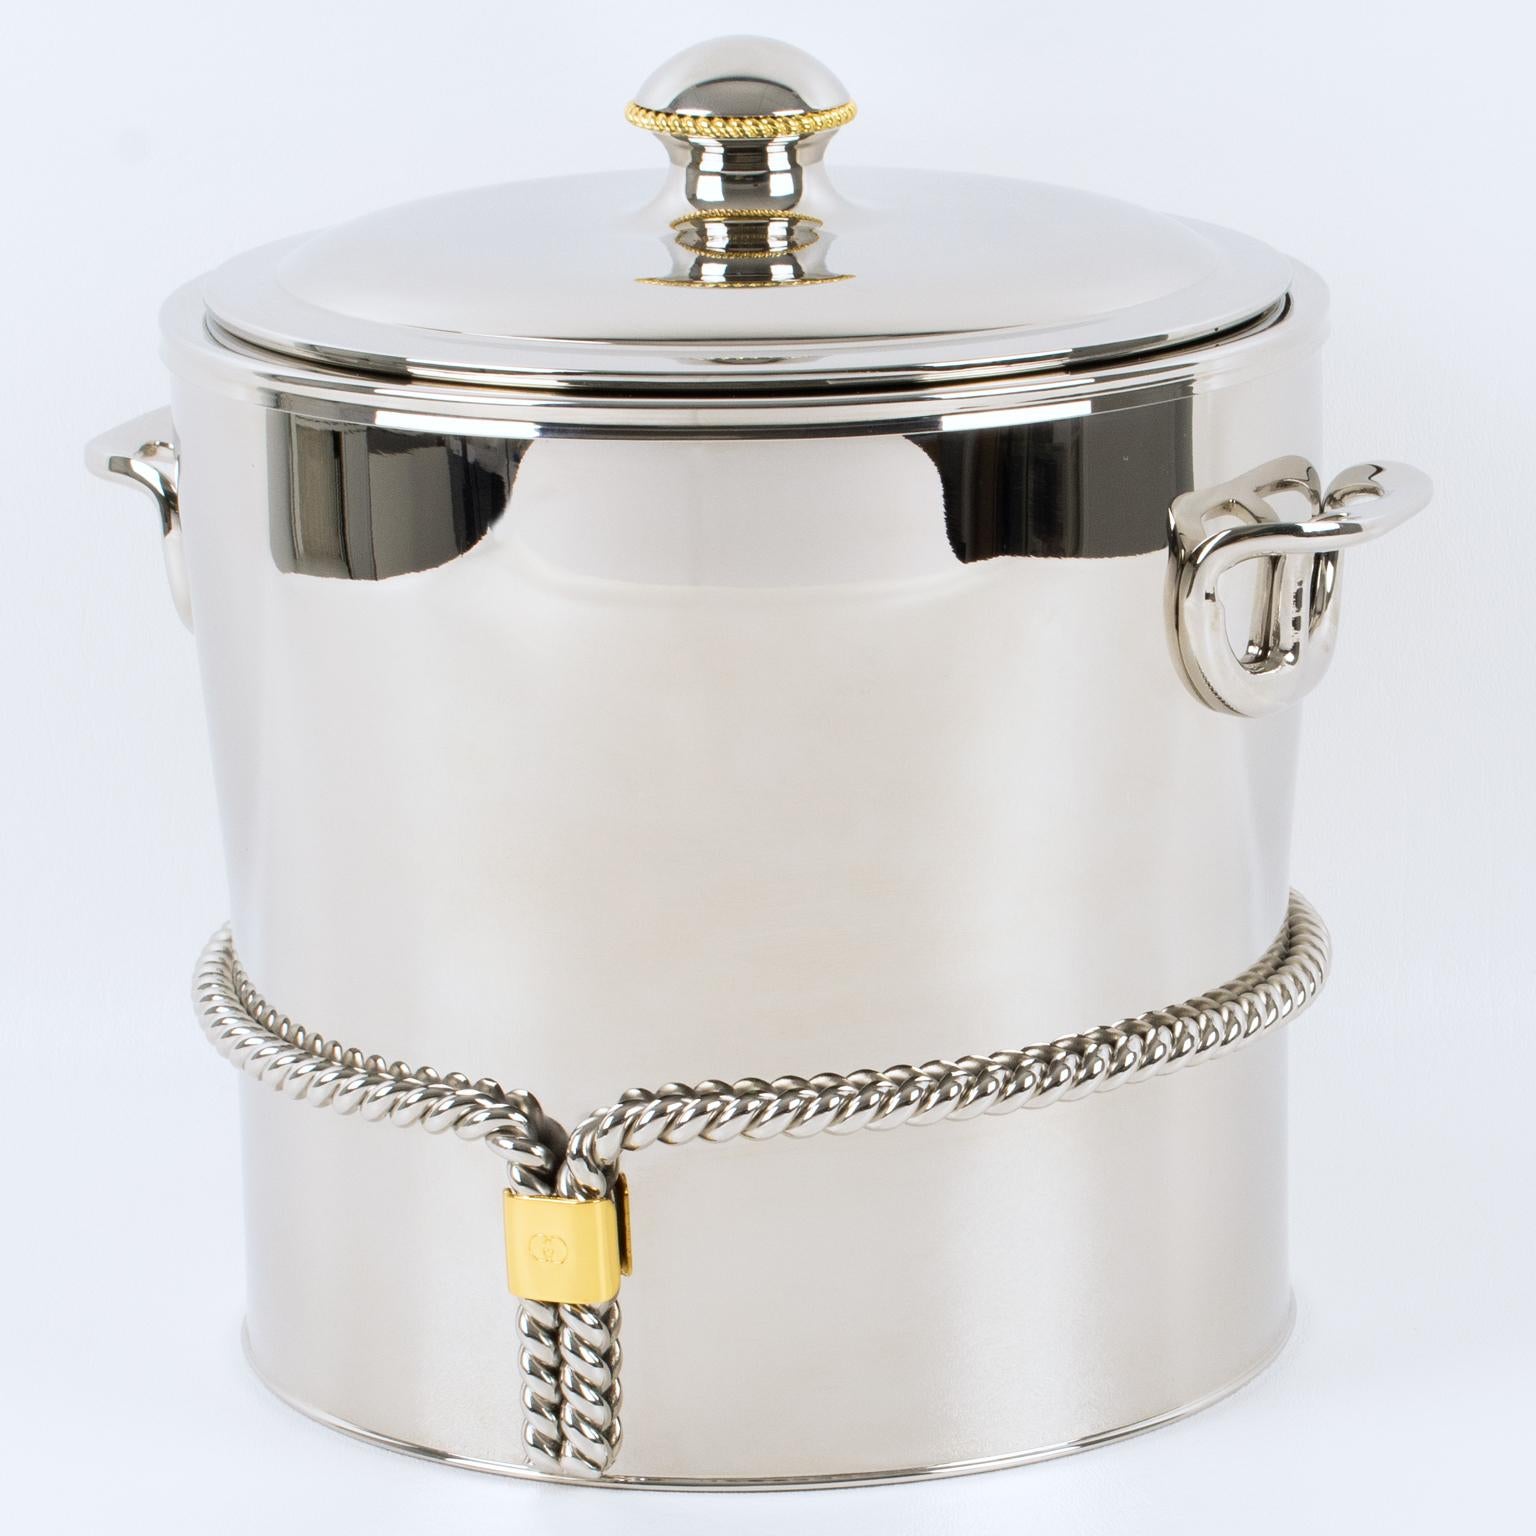 Italian Gucci Italy Silvered and Gold Plated Metal Barware Ice Bucket For Sale